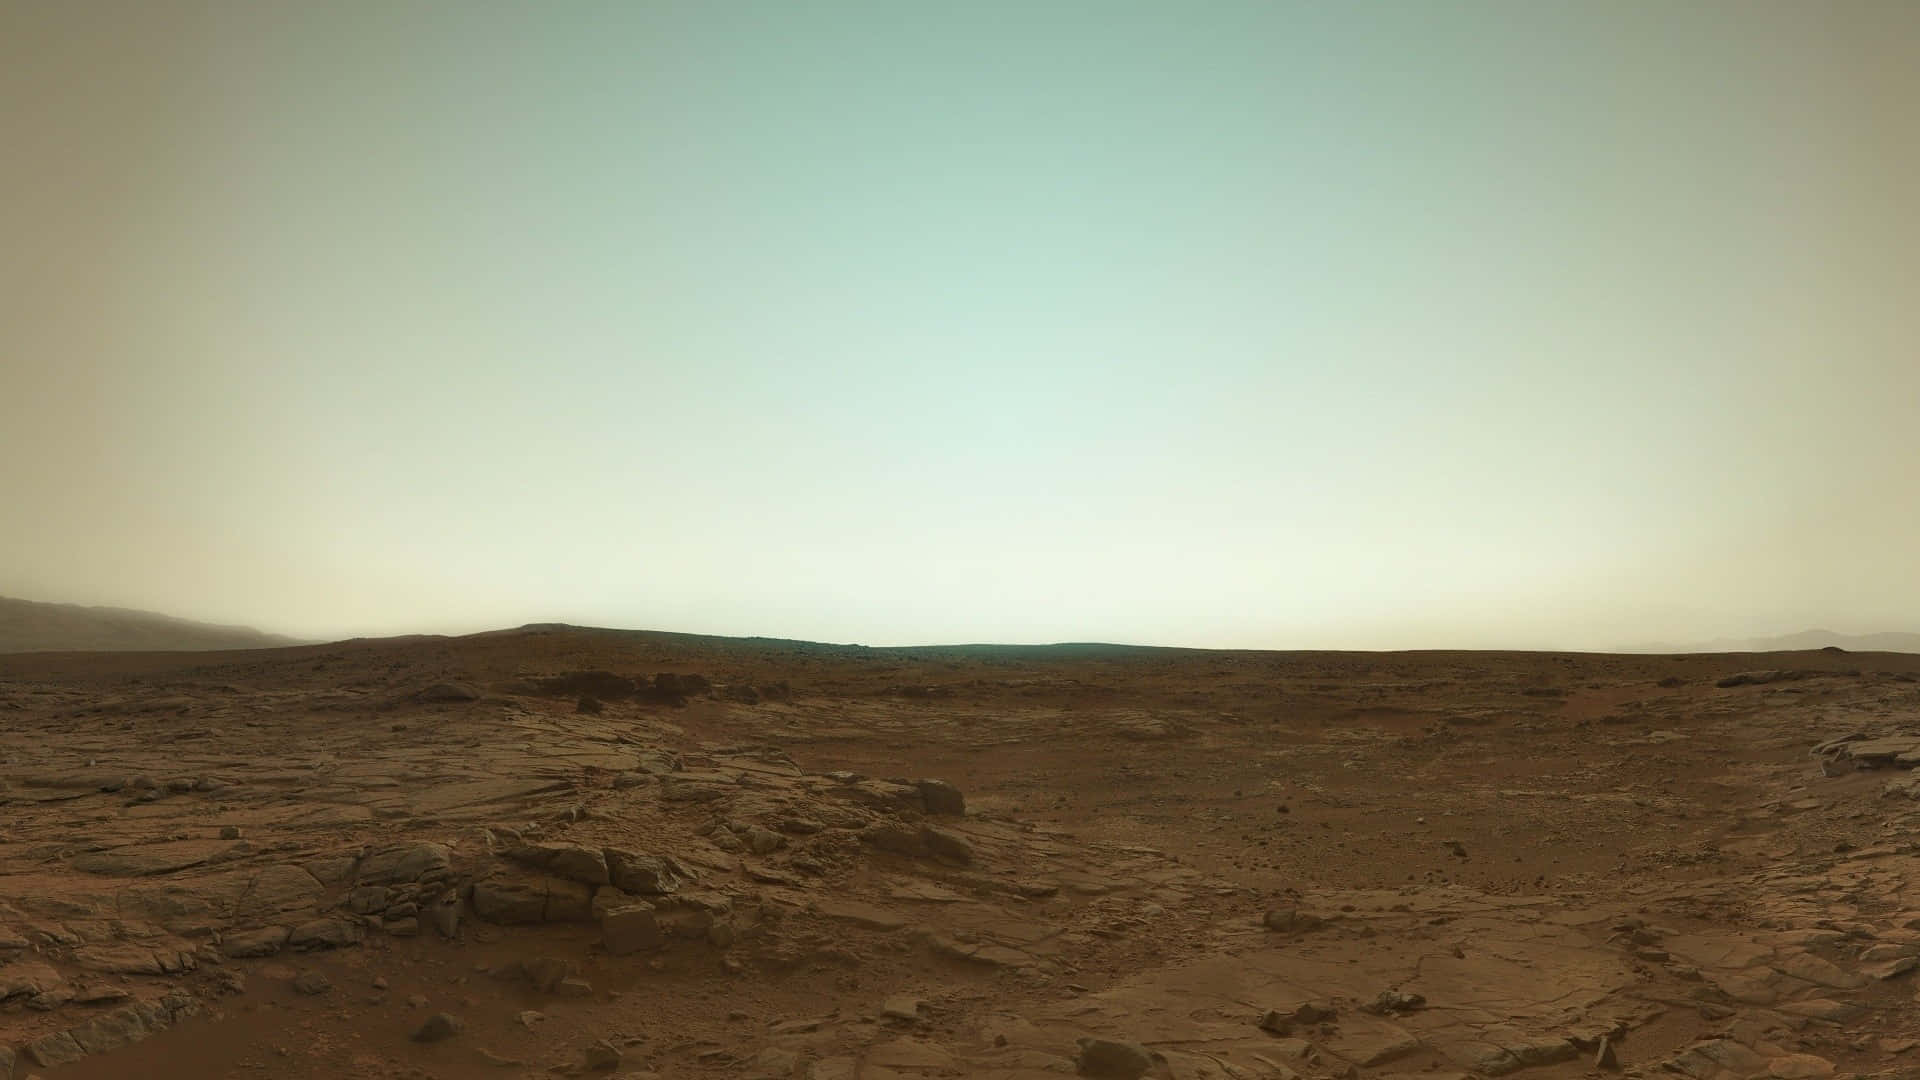 The surface of Mars, with its orange and ochre-coloured landscape